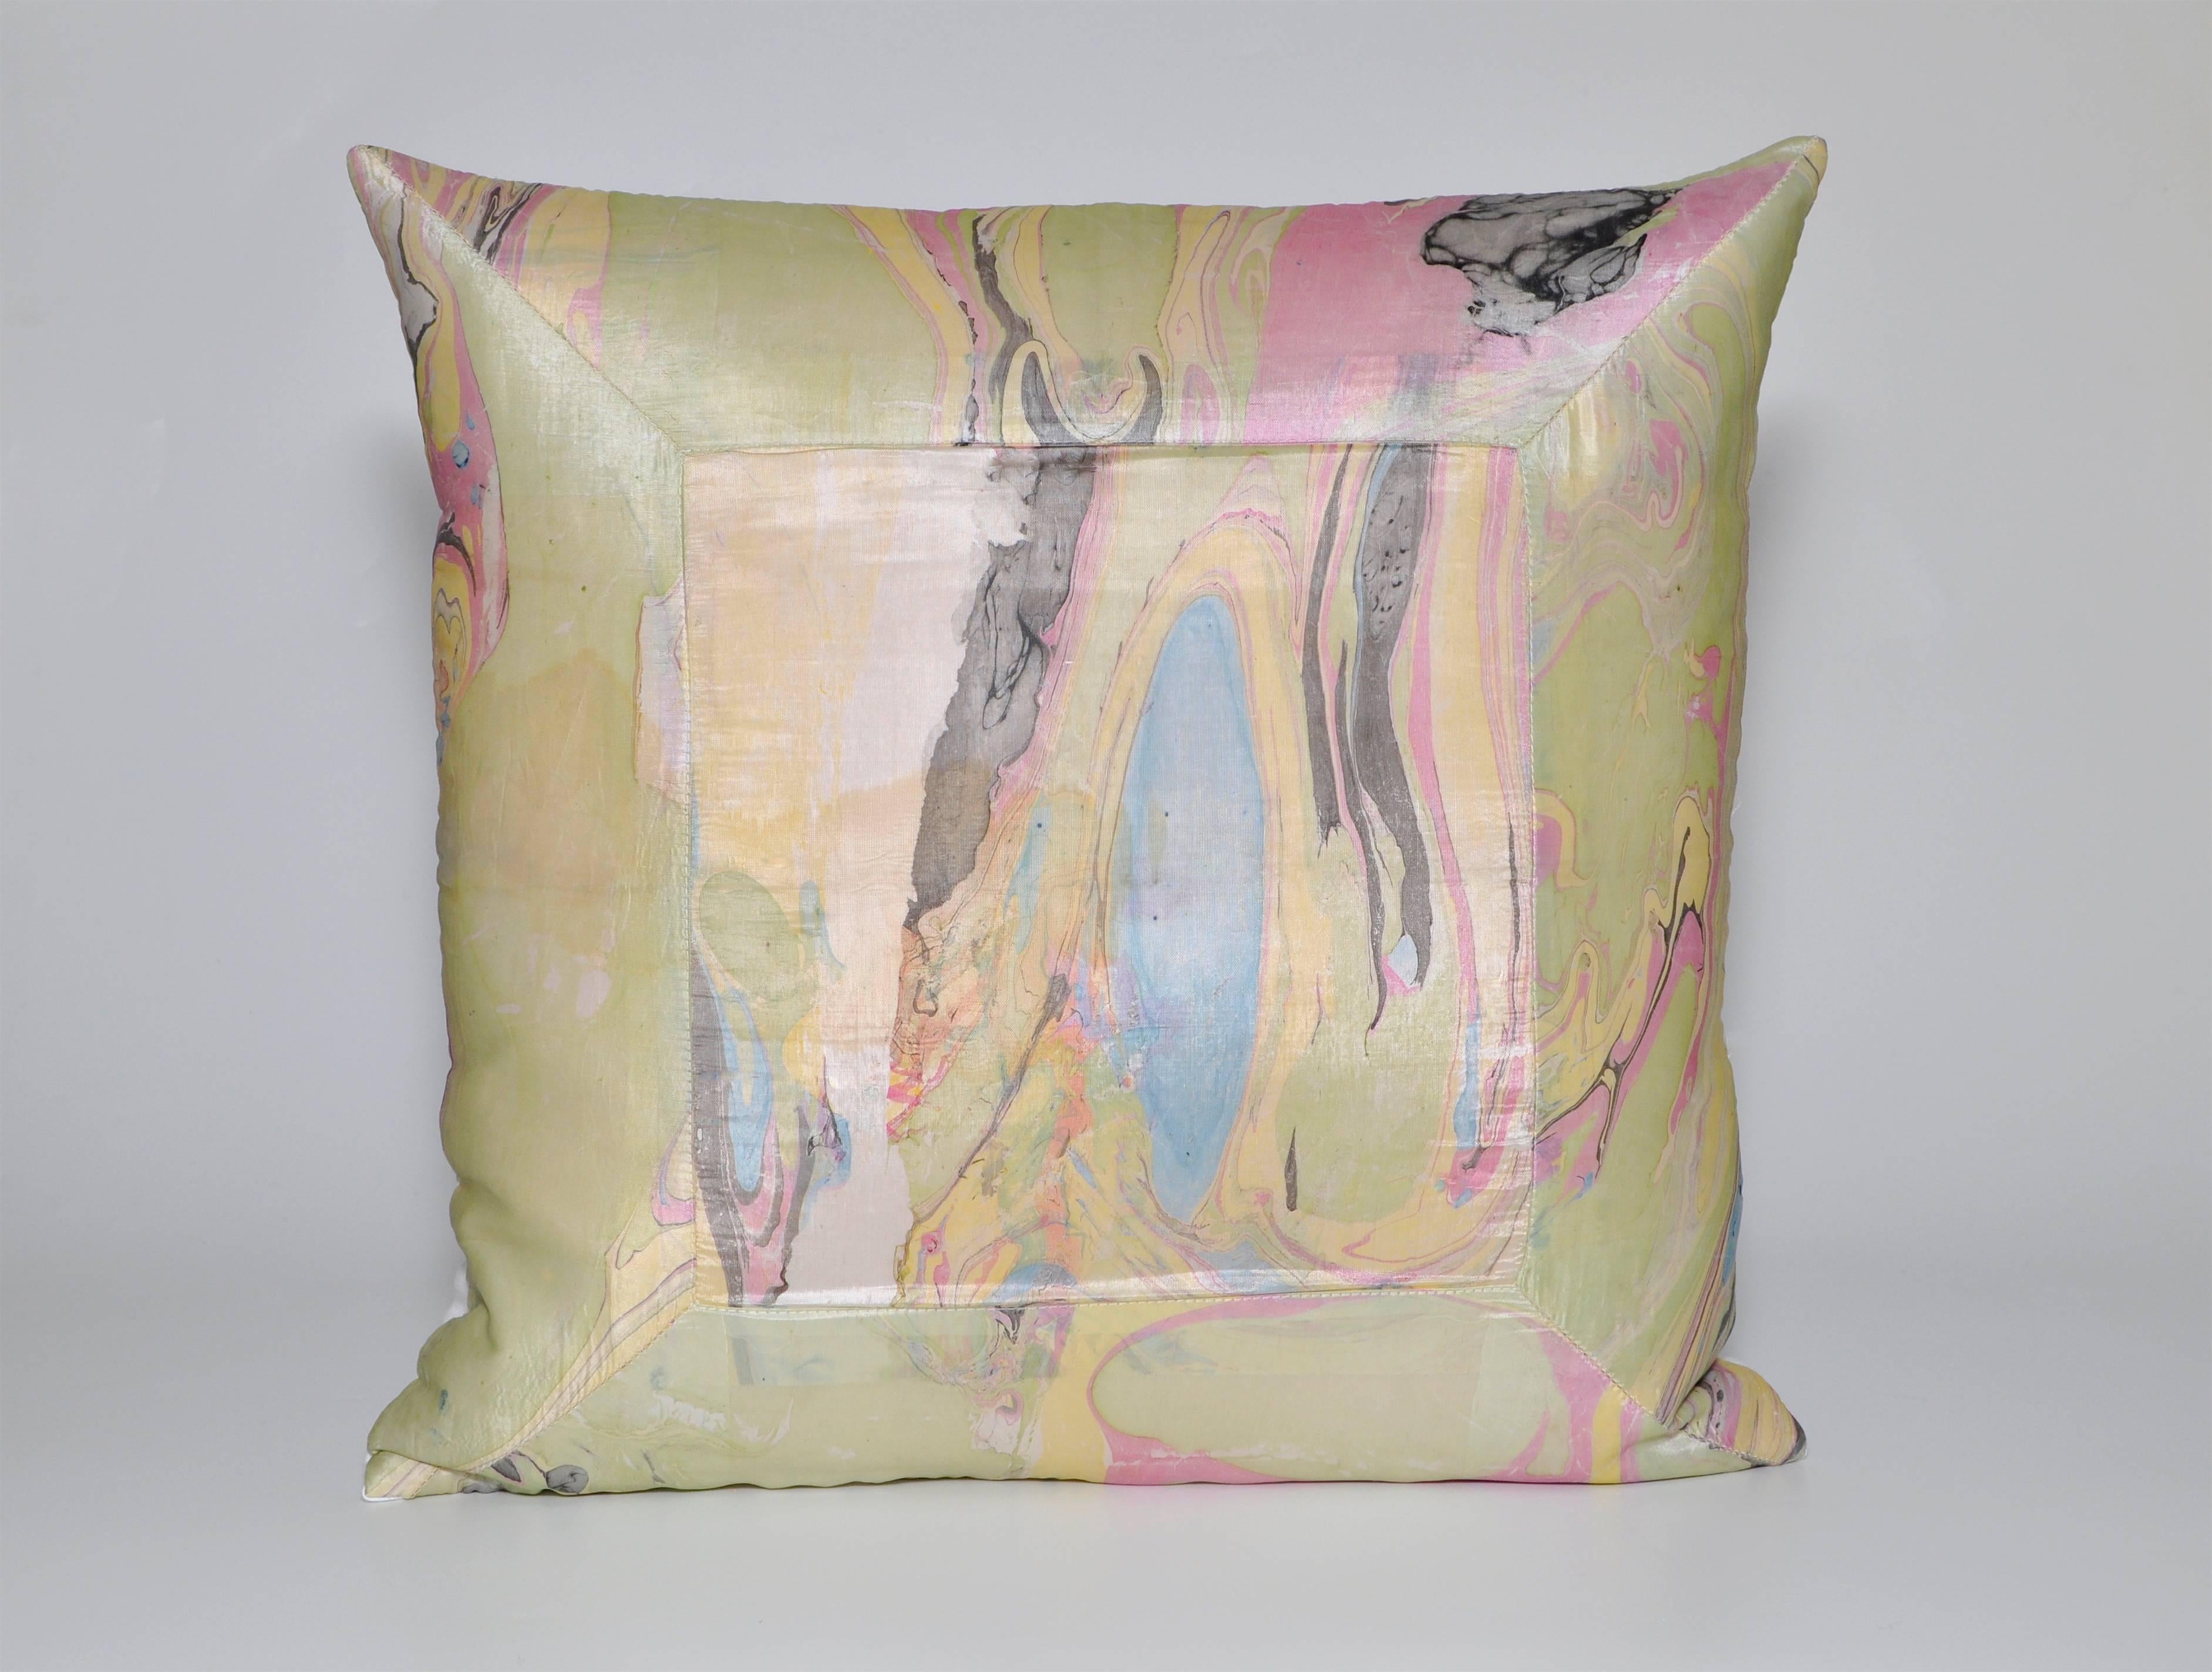 Large custom-made one-of-a-kind pair of luxury cushions (pillows) created from exquisite vintage fabric in a beautiful marbled pattern. The material is slightly distressed and faded which gives it its sumptuous character and has a subtle sheen. The